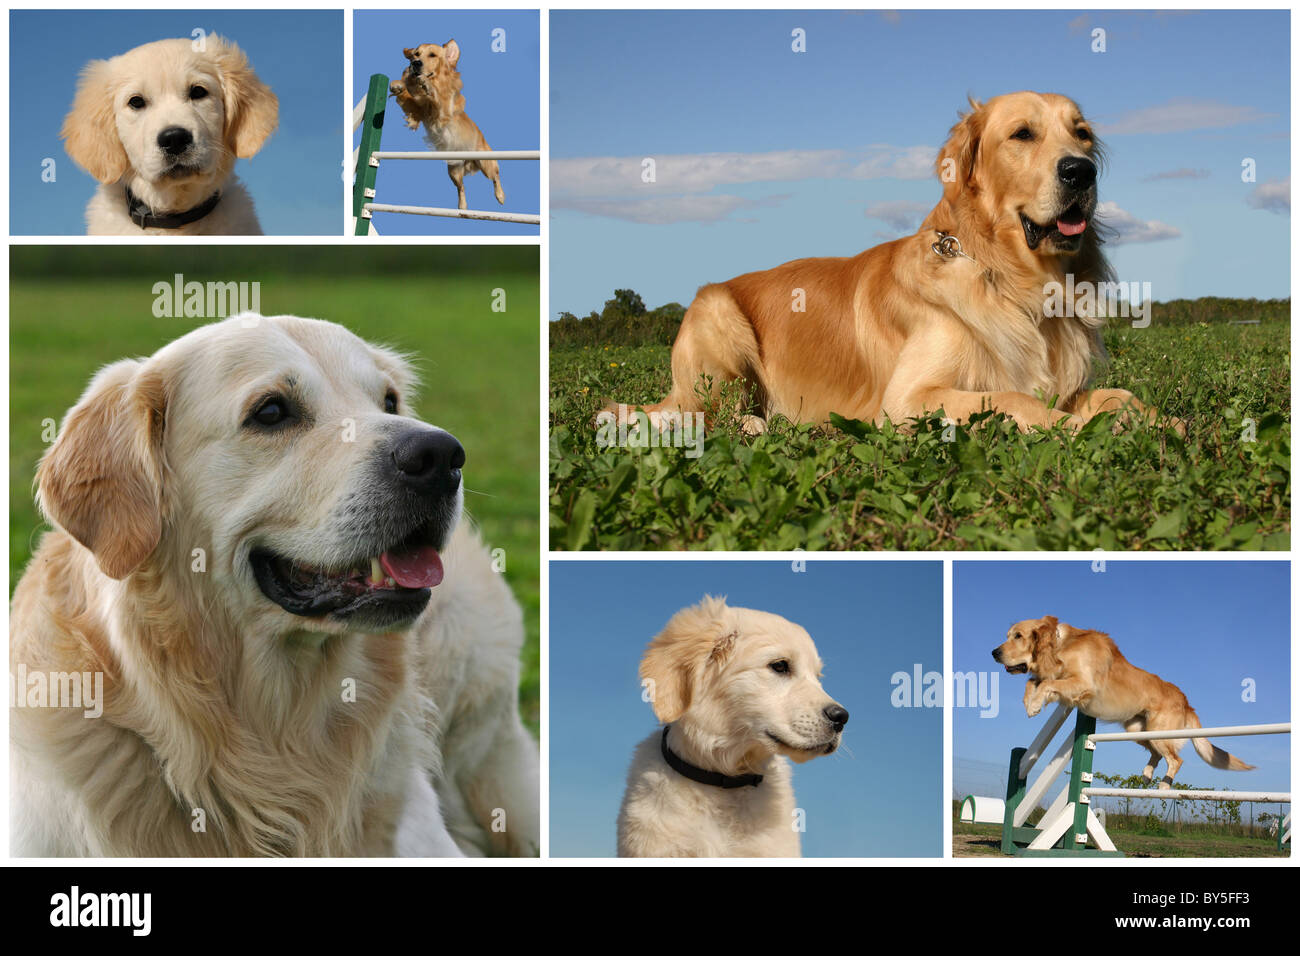 composite picture with purebred dogs and puppies golden retriever Stock Photo